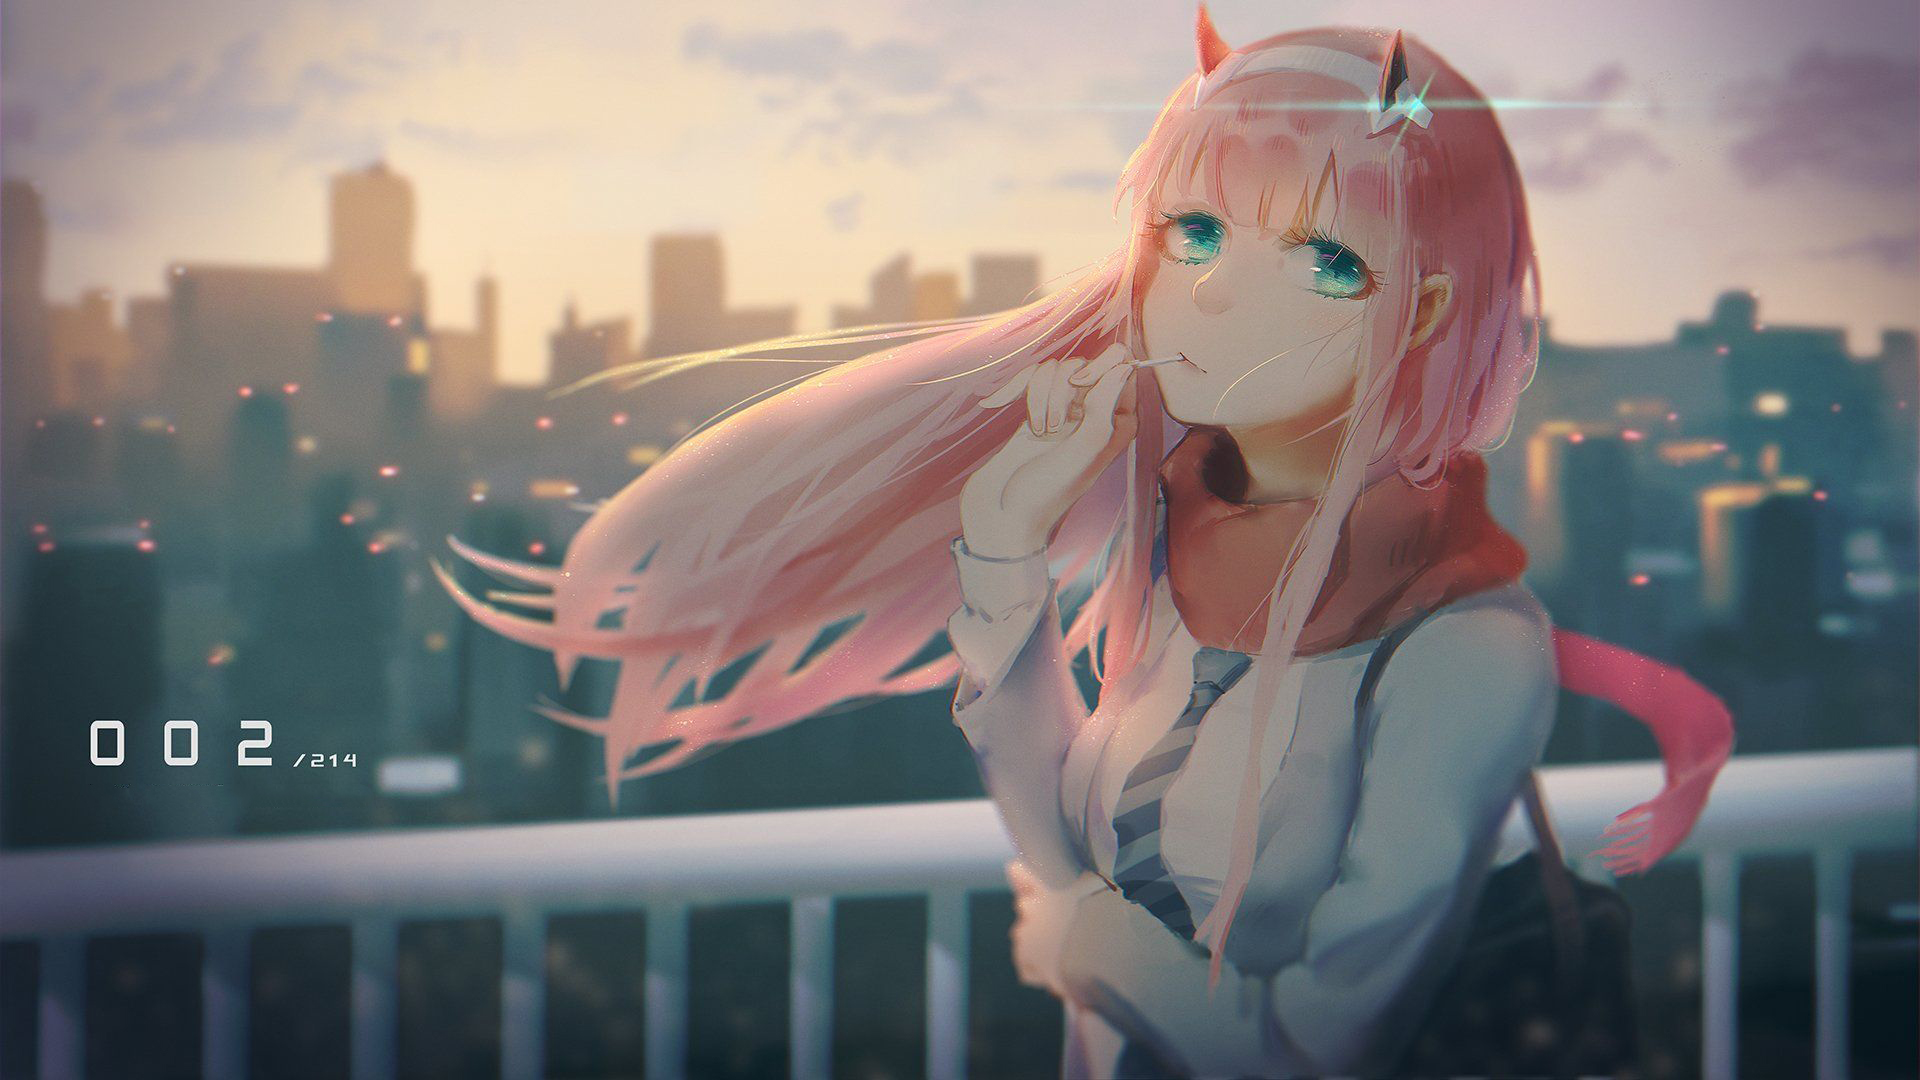 Hình nền  Anime cô gái picture in picture Zero Two Zero Two Darling in  the FranXX Darling in the FranXX 1080x1902  Todd  1410357  Hình nền đẹp  hd  WallHere